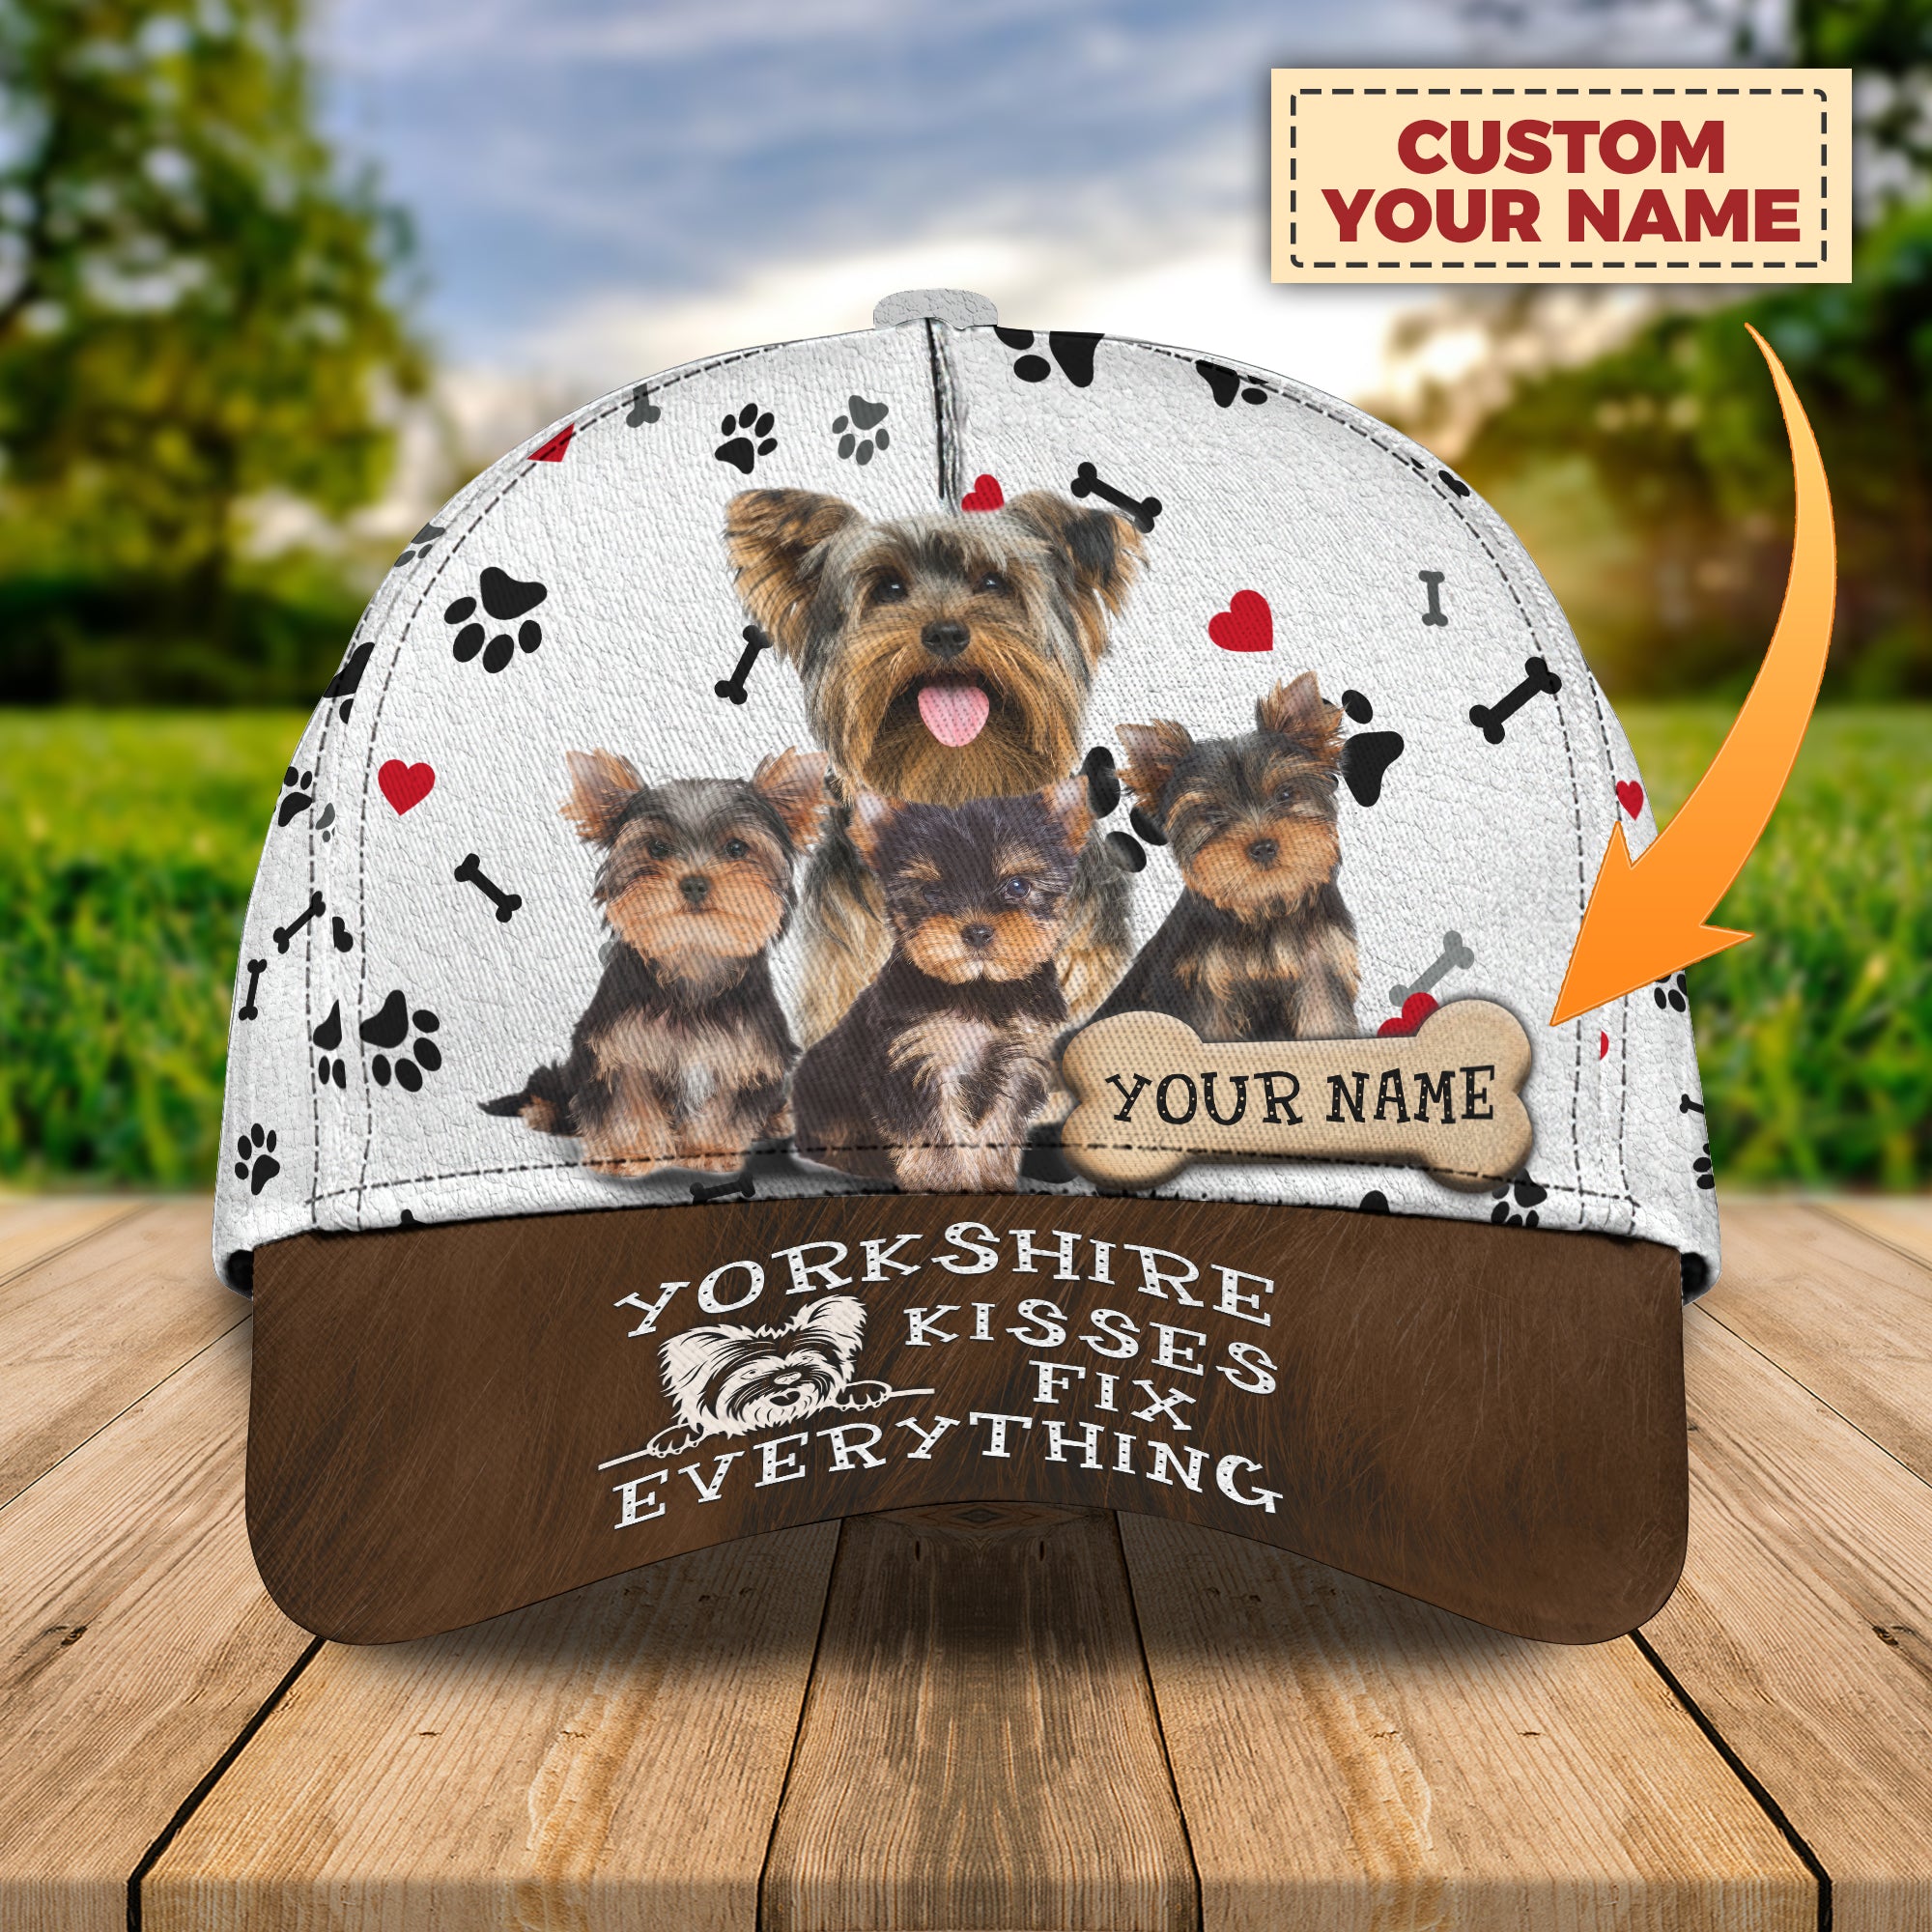 Love Yorkshire - Personalized Name Cap 13 - Tad